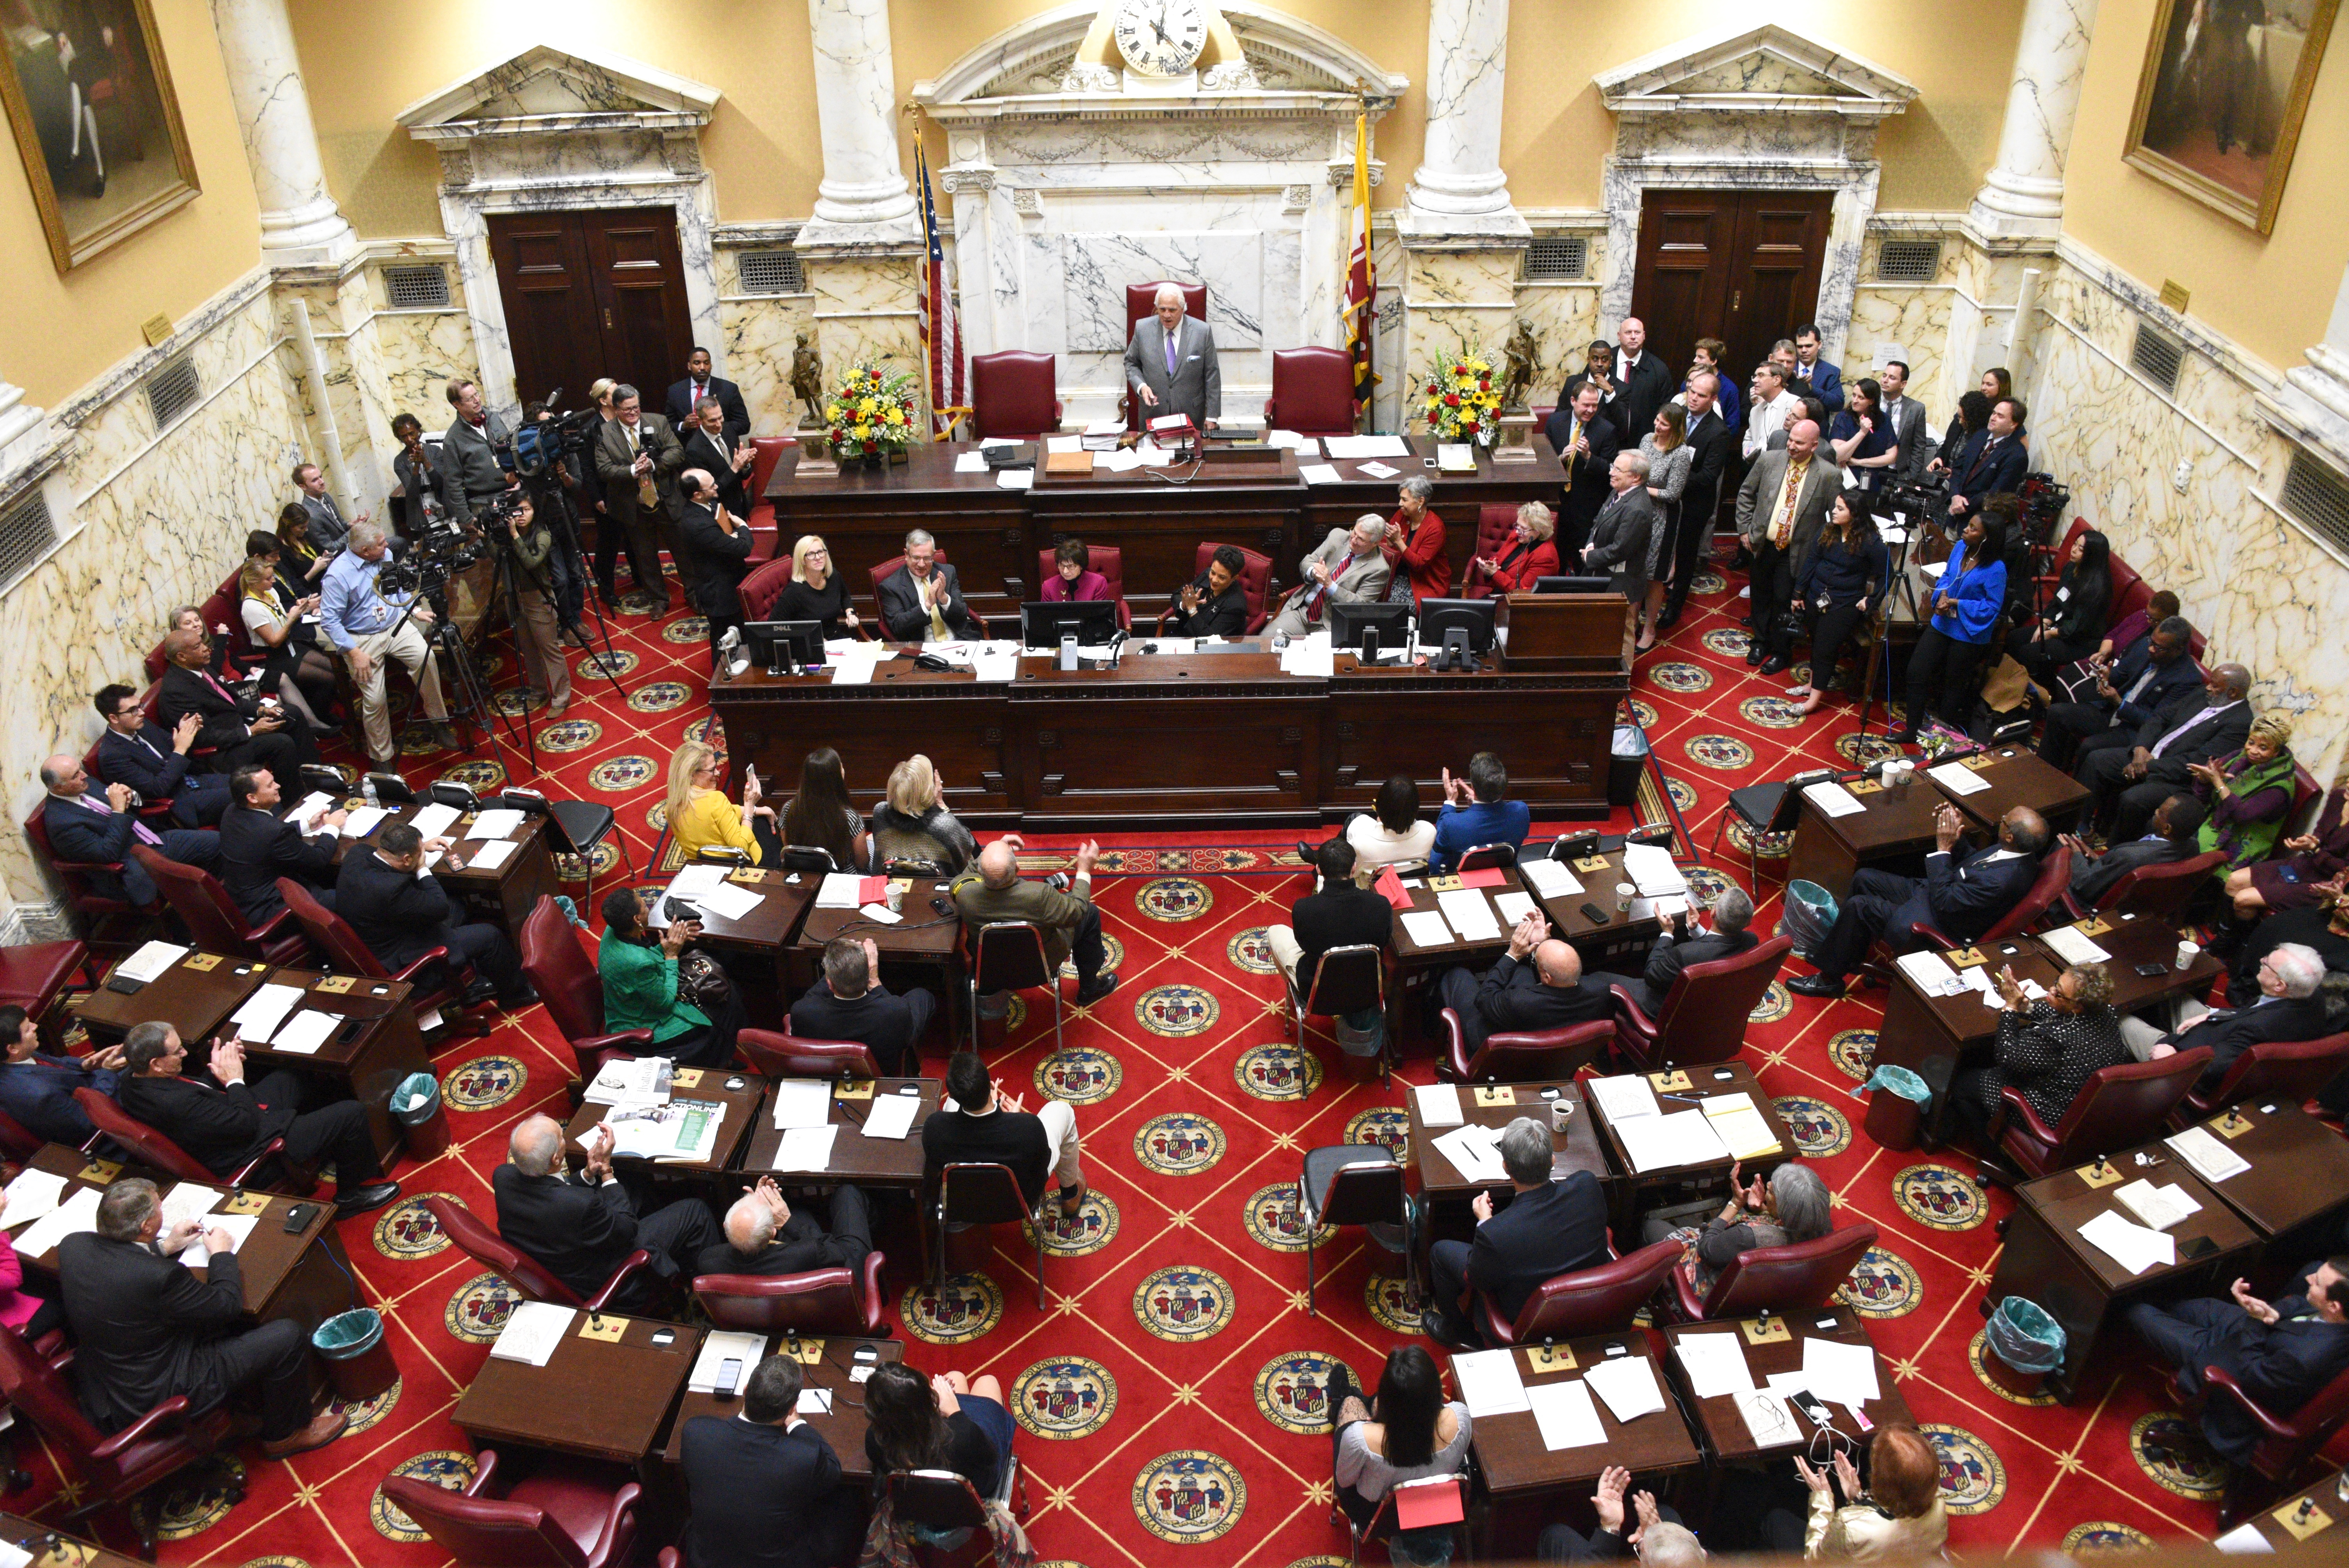 State Roundup: Candidates given more time to file; in-person Statehouse sessions begin but 100+ groups want video testimony to continue; Hogan rules out Senate, but not White House